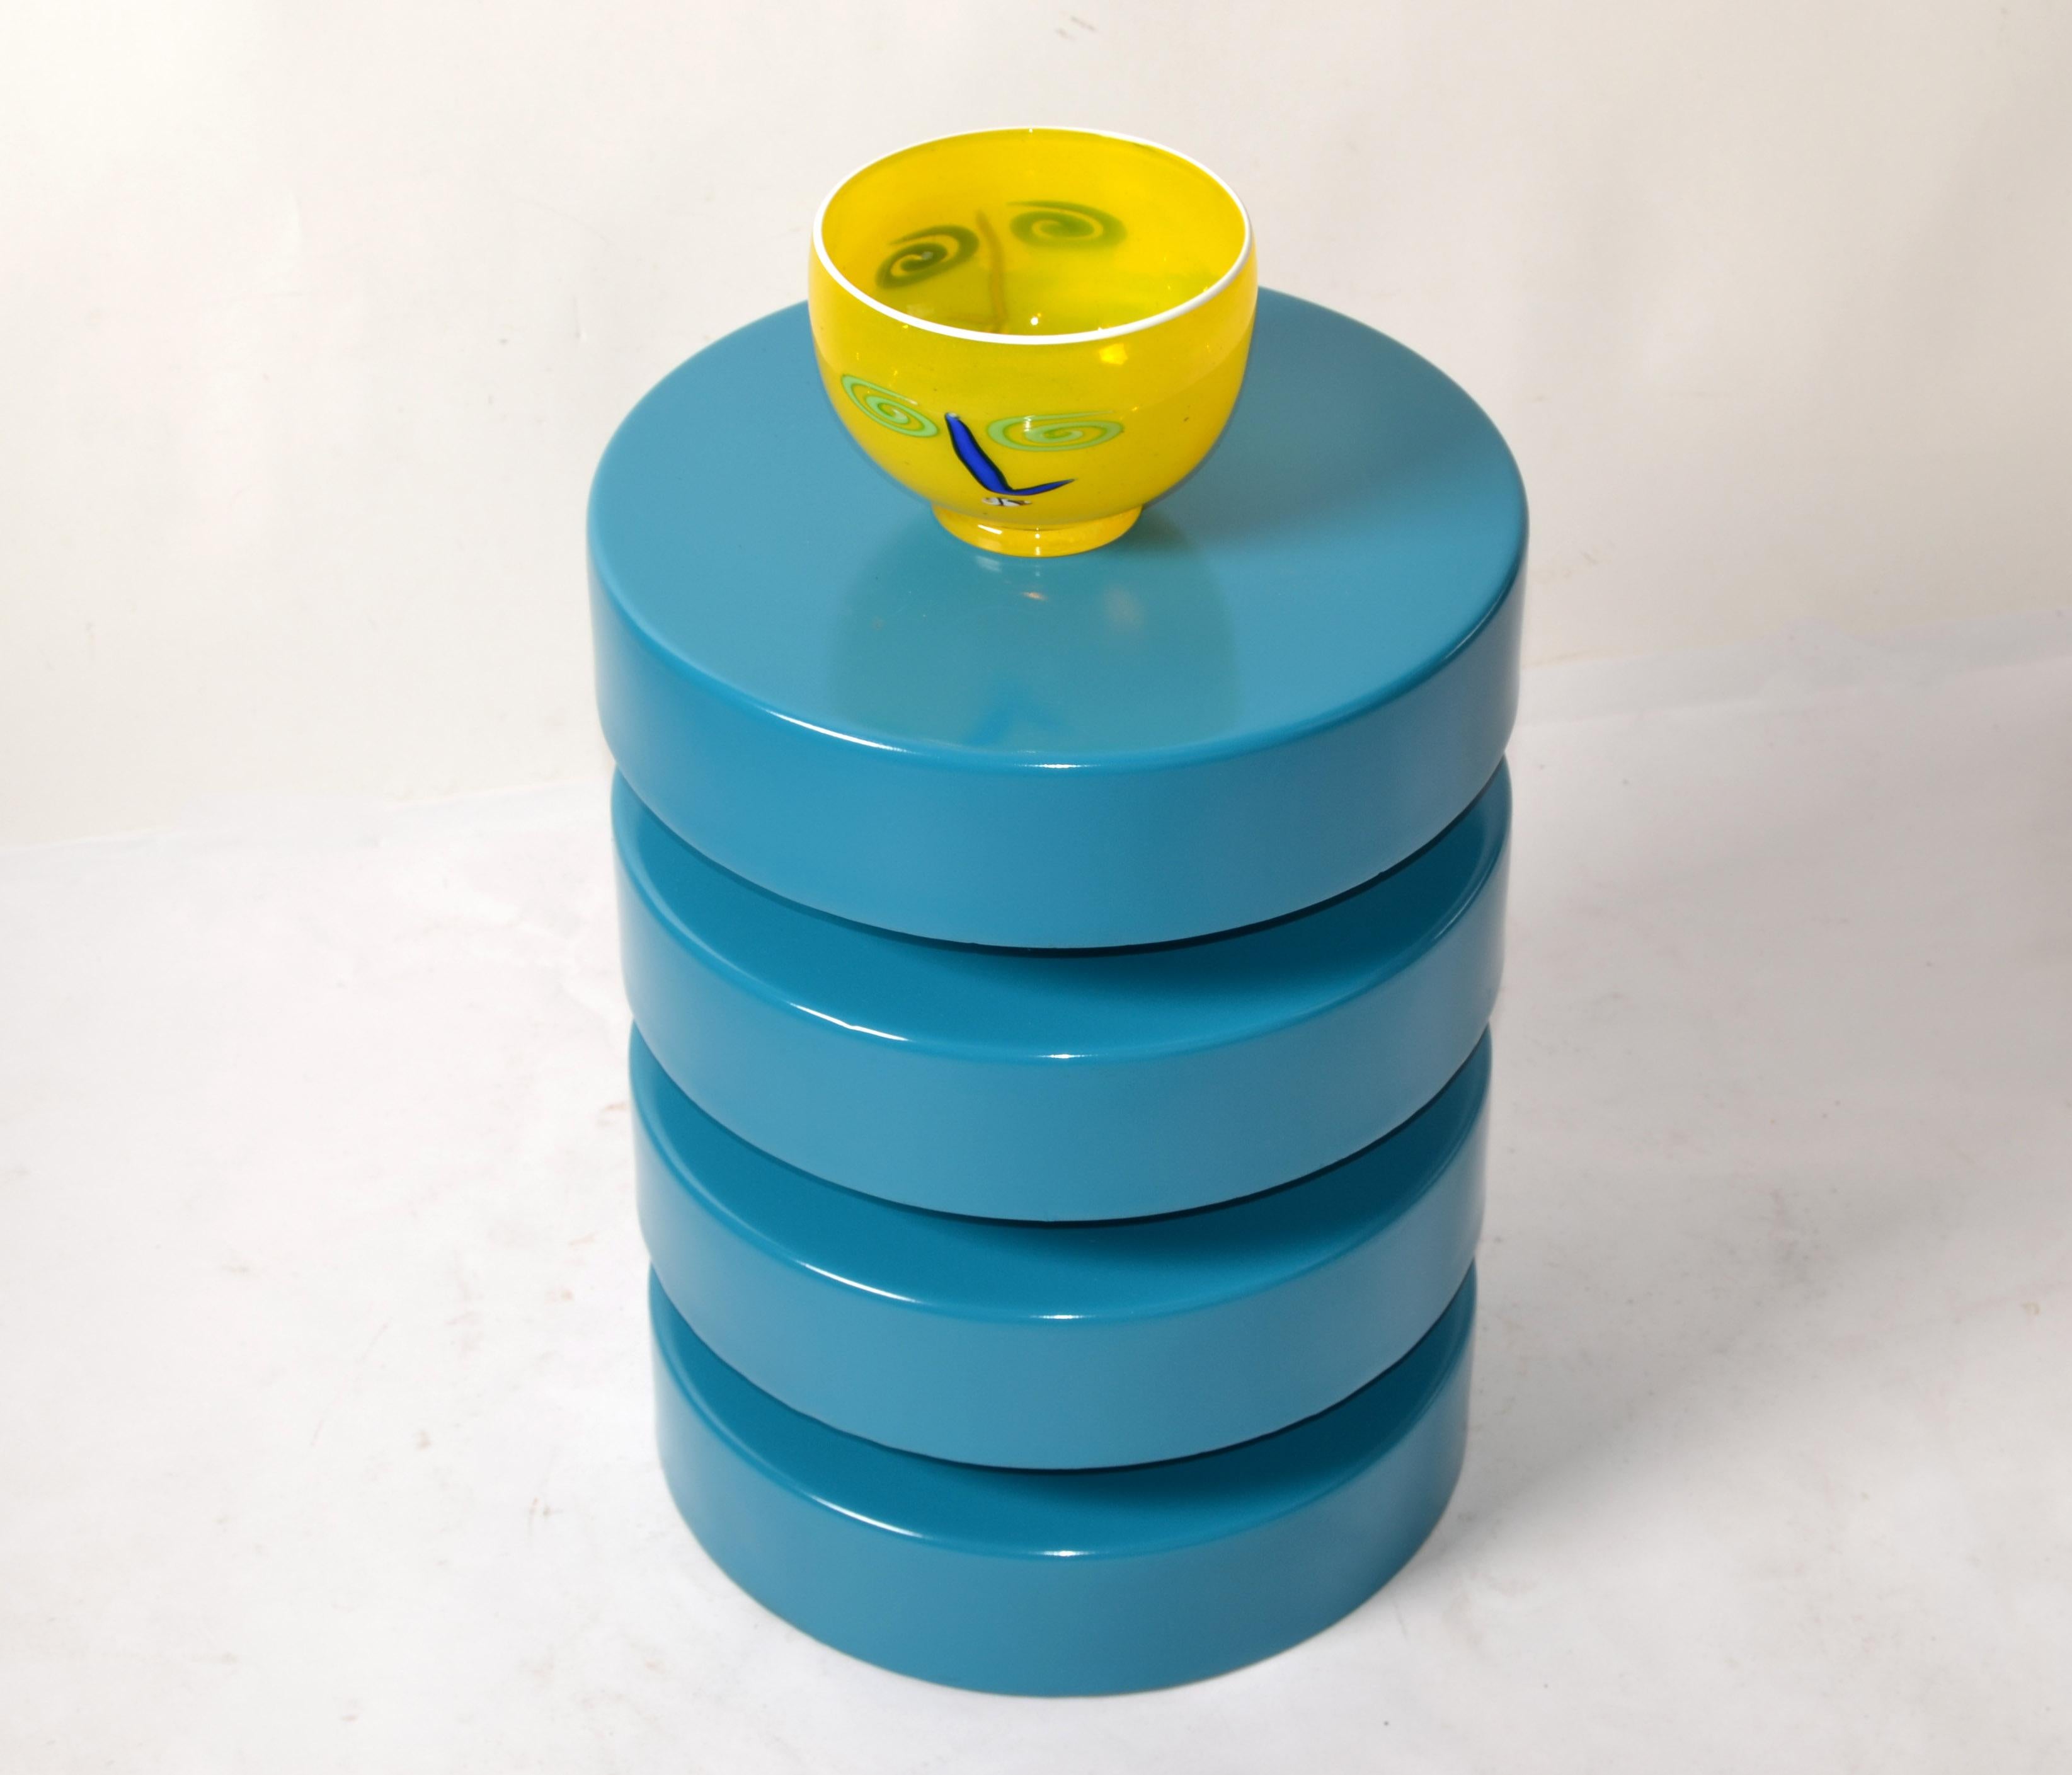 Round Machine Age Industrial Coil Cylinder shaped heavy Steel Drink table, Side Table or End Table. 
Mid-Century Modern Space Age Column in Turquoise Teal Paint Finish to display Your favorite Sculpture, Vases, Vessel or Busts. 
Base measures